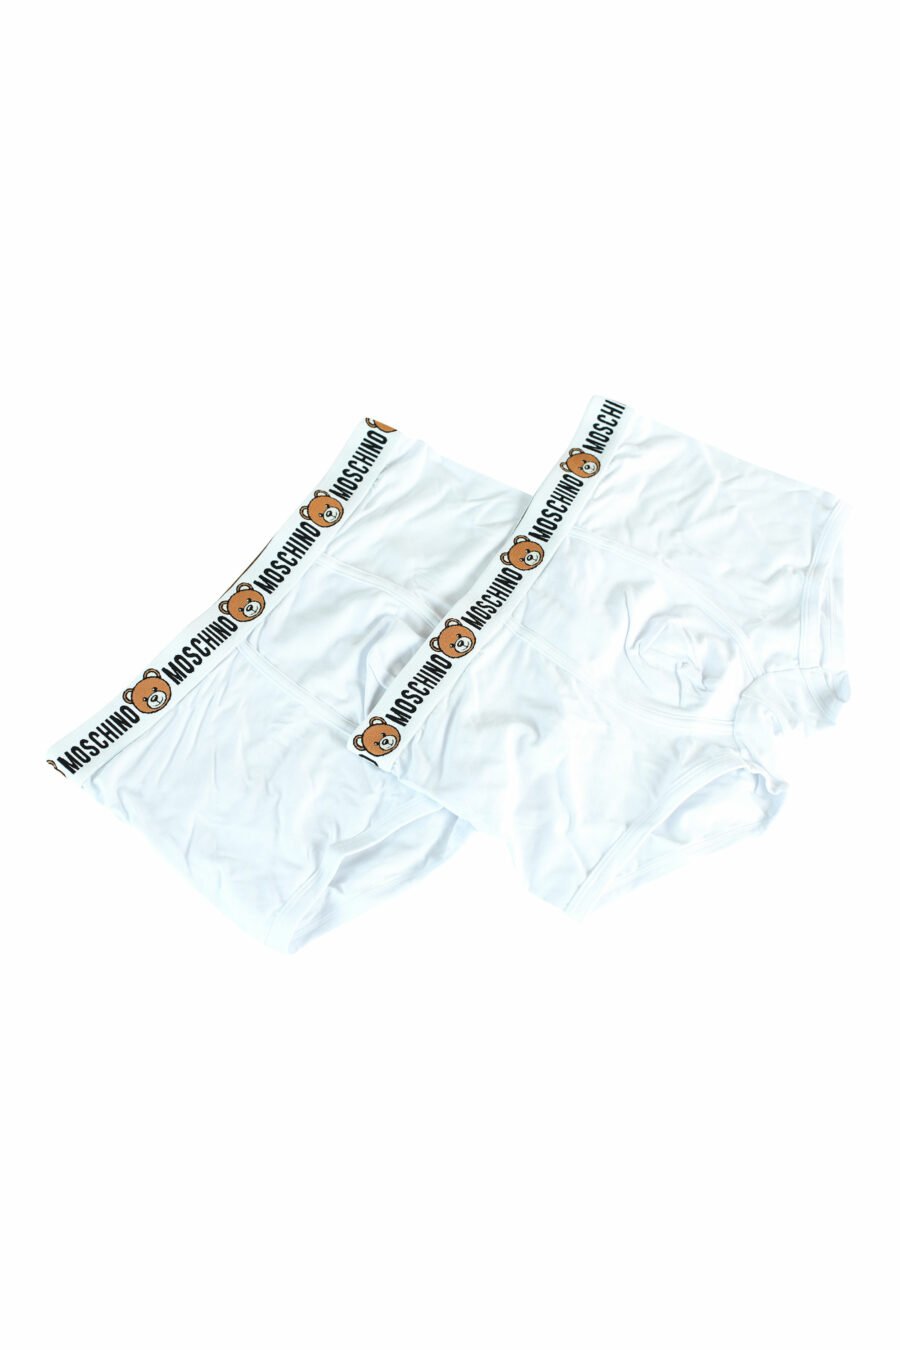 Pack of two white boxers with bear logo on waistband - 889316228885